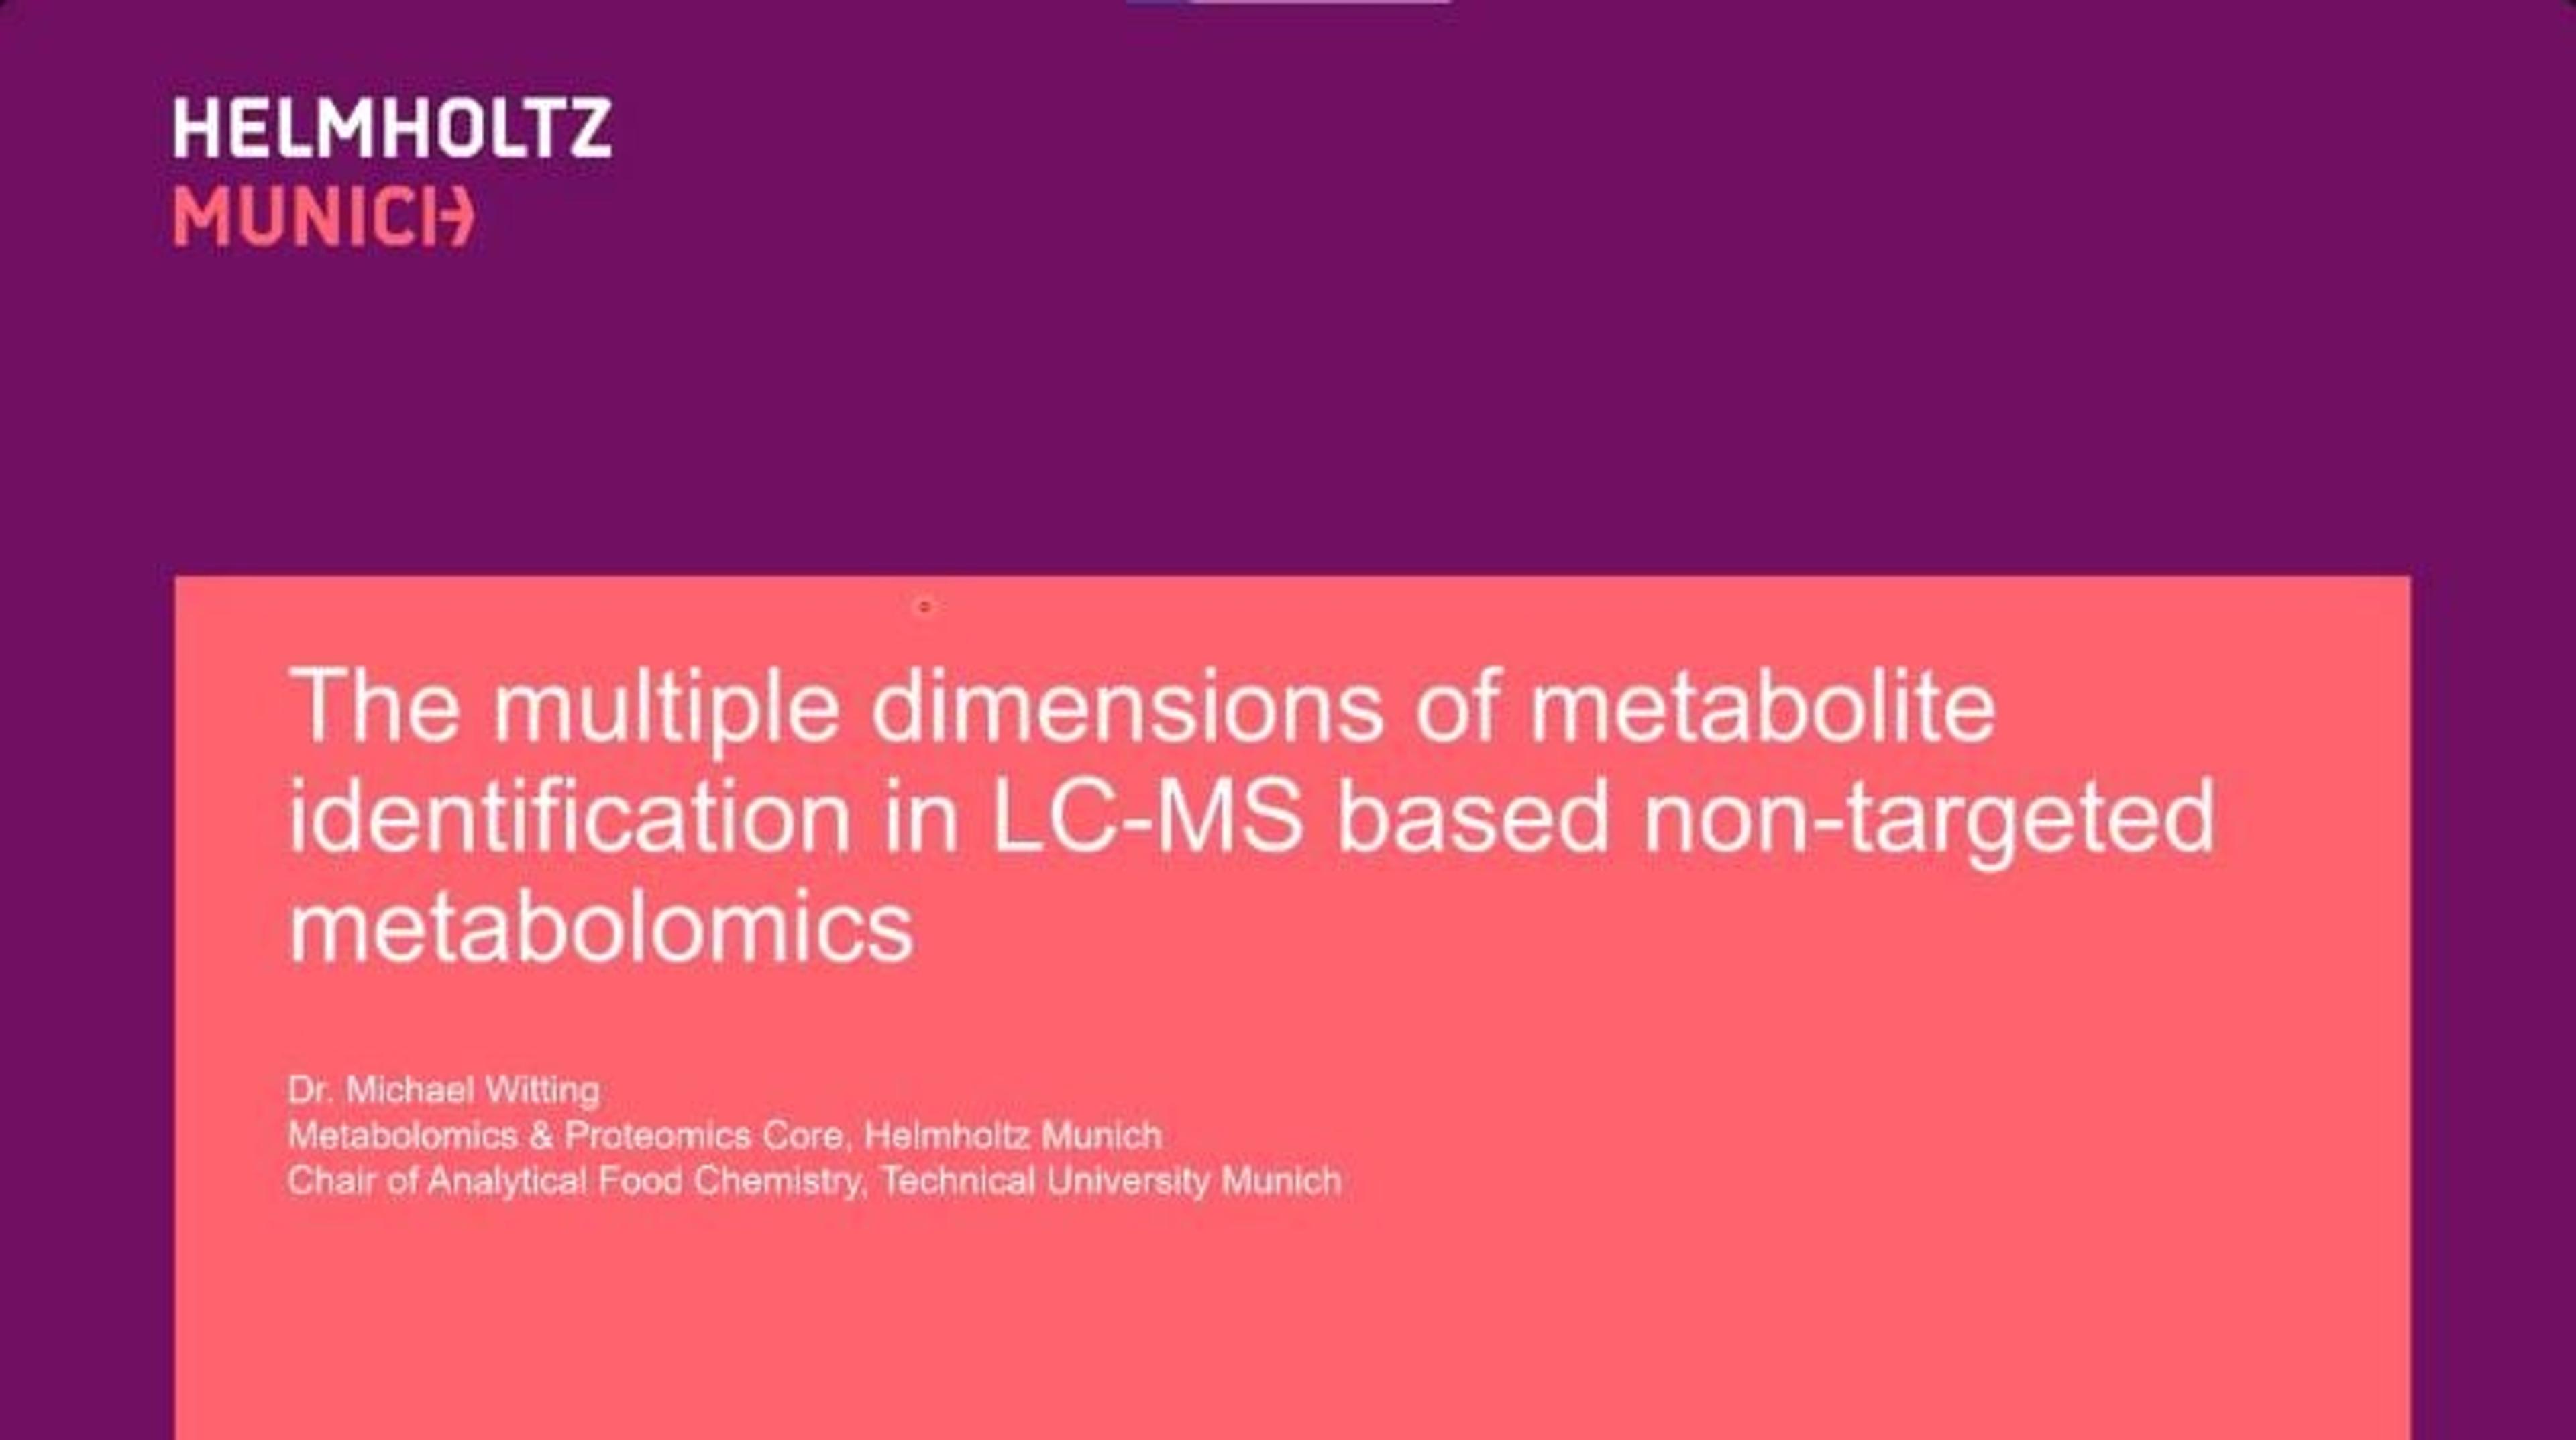 The multiple dimensions of metabolite identification in LC-MS based non-targeted metabolomics